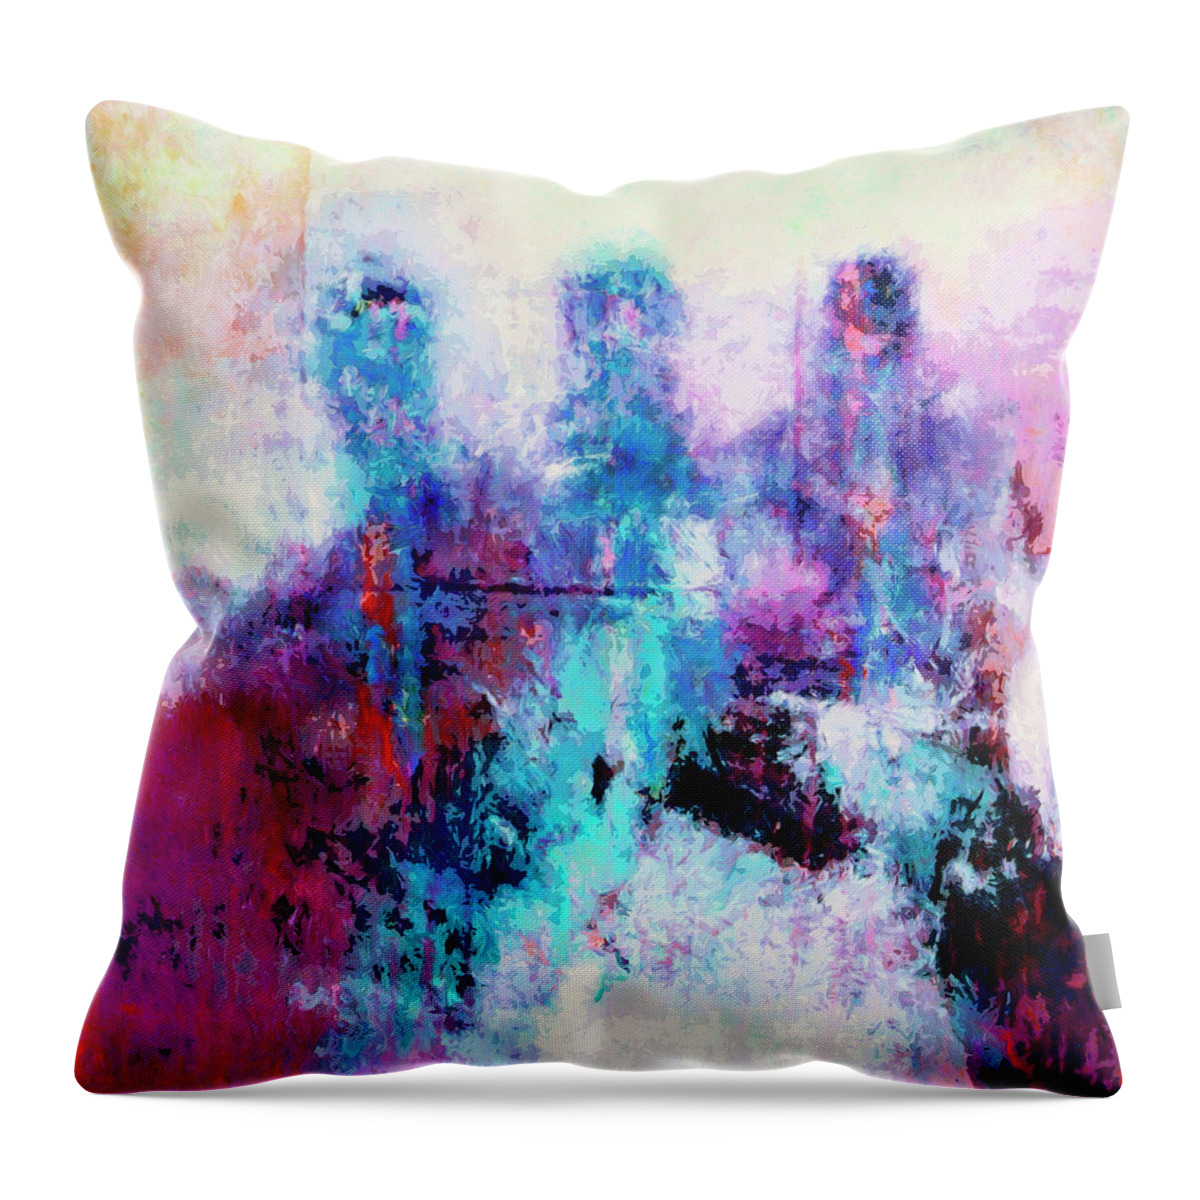 Abstract Throw Pillow featuring the painting Witnesses by Dominic Piperata